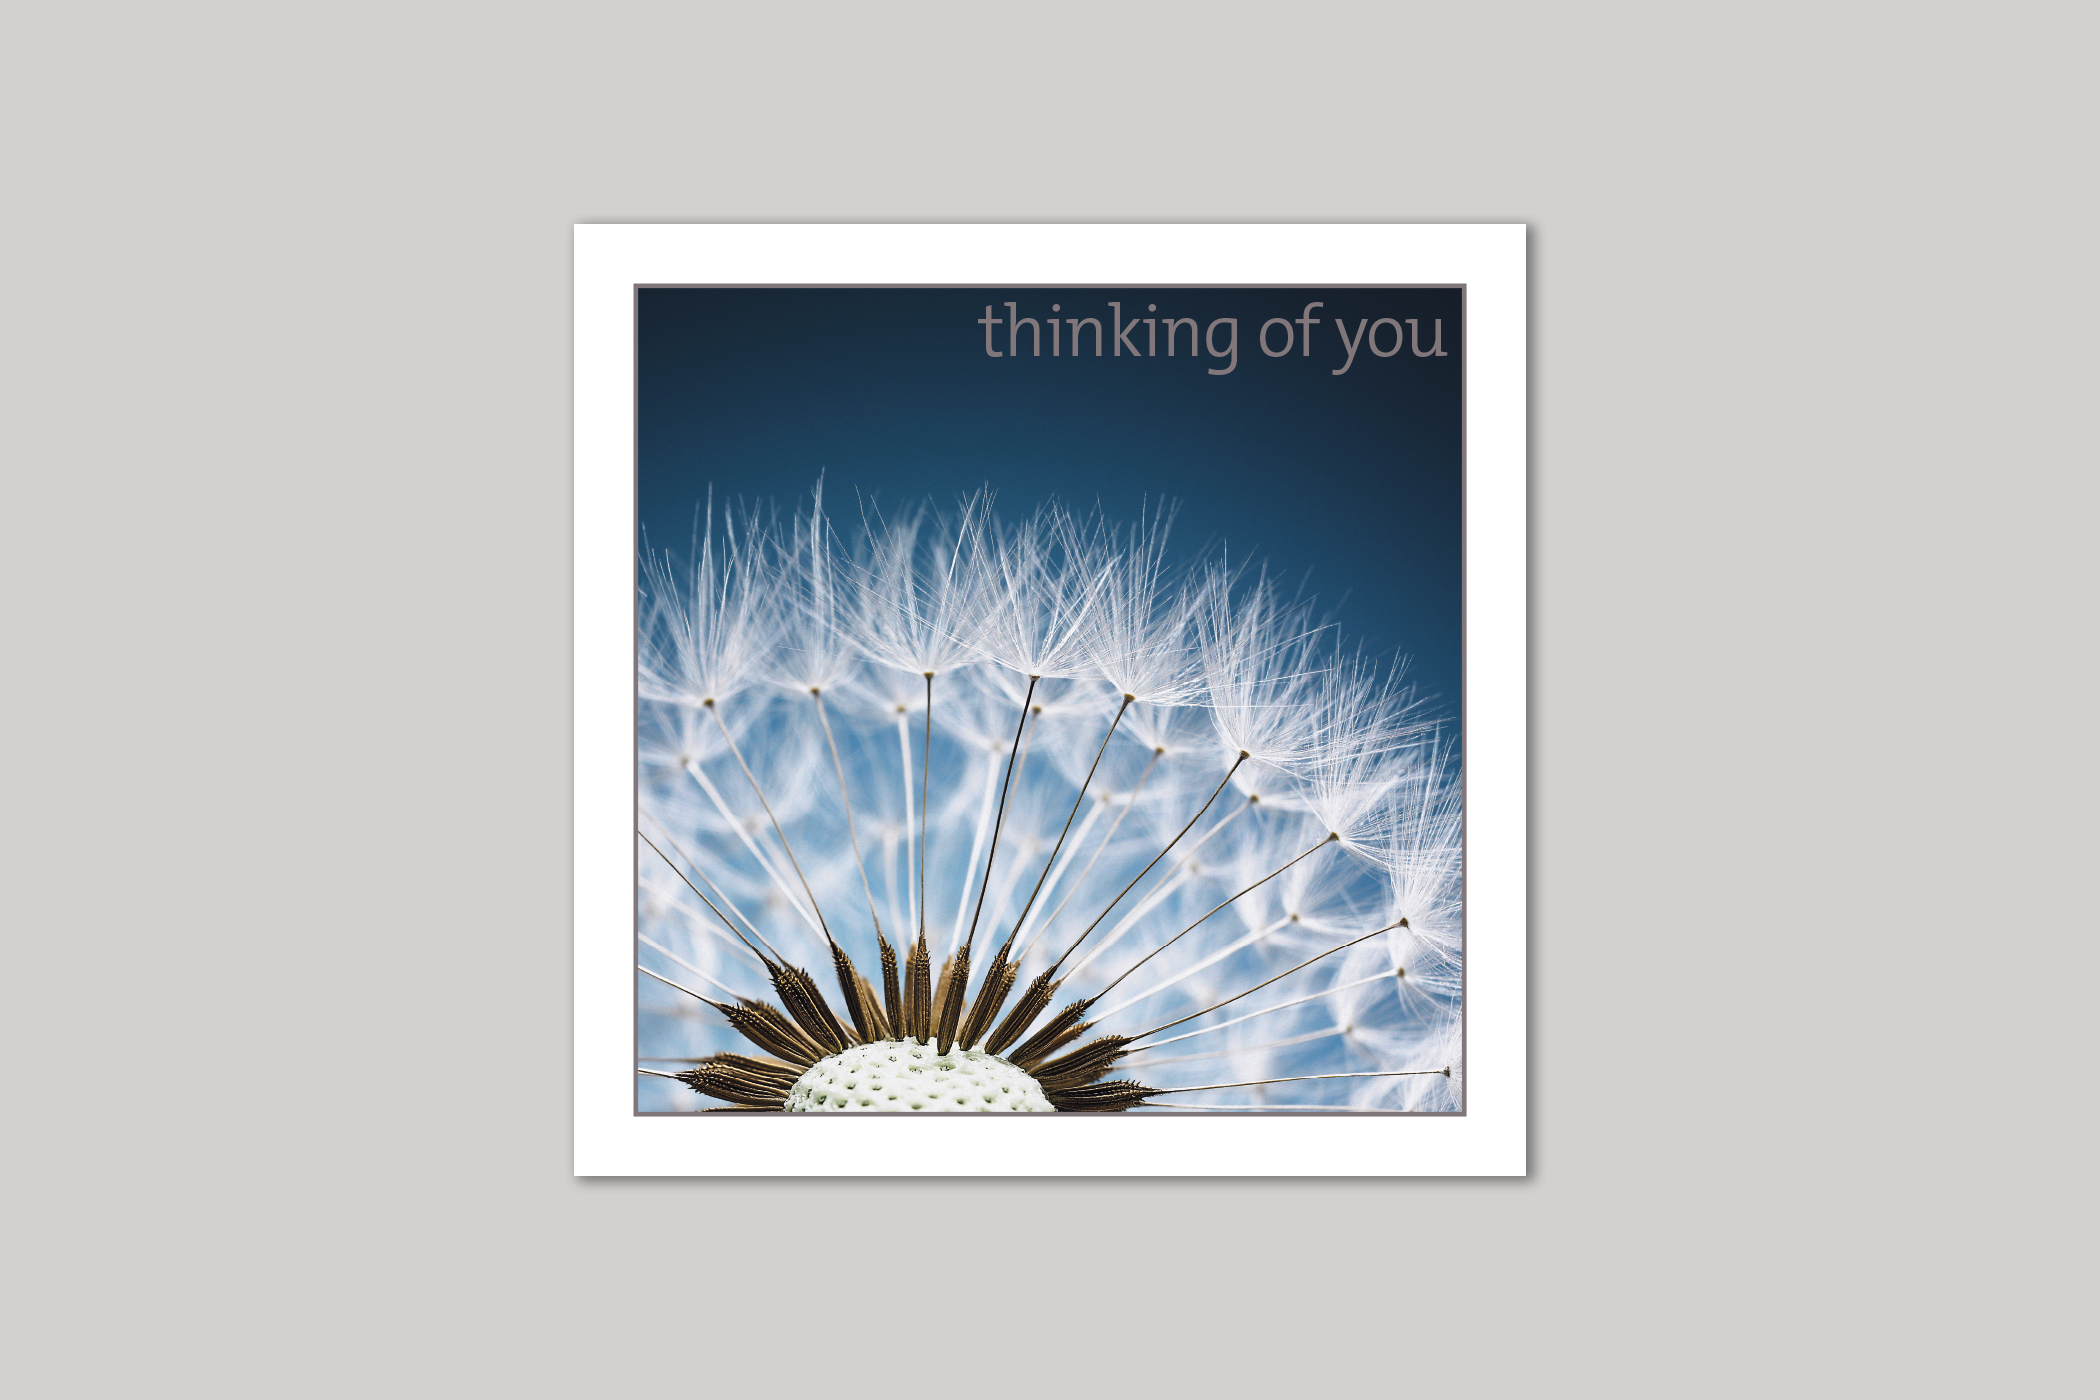 Dandelion thinking of you card from Exposure Silver Edition range of greeting cards by Icon.